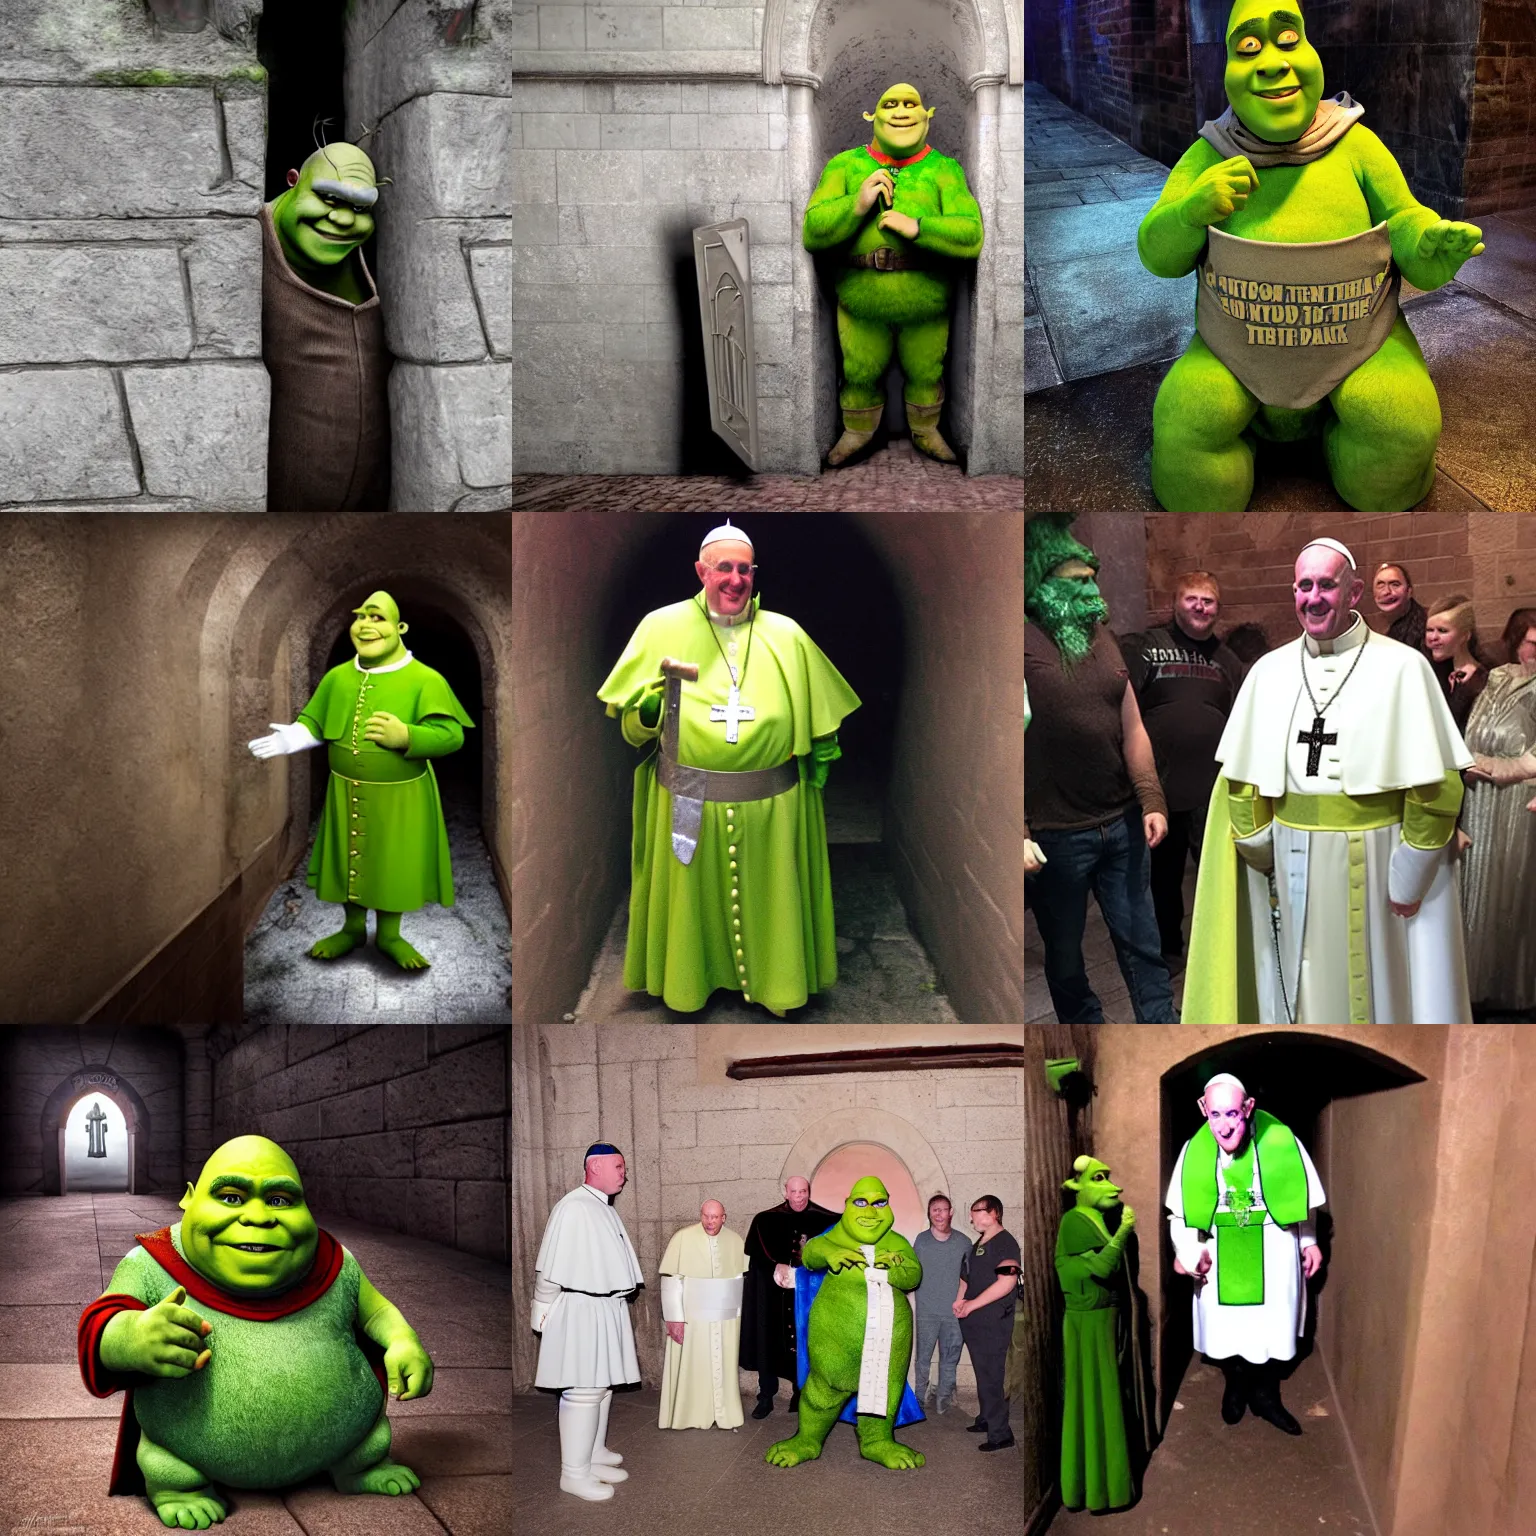 Prompt: Shrek dressed up as pope in the dark sewers, creopy photo